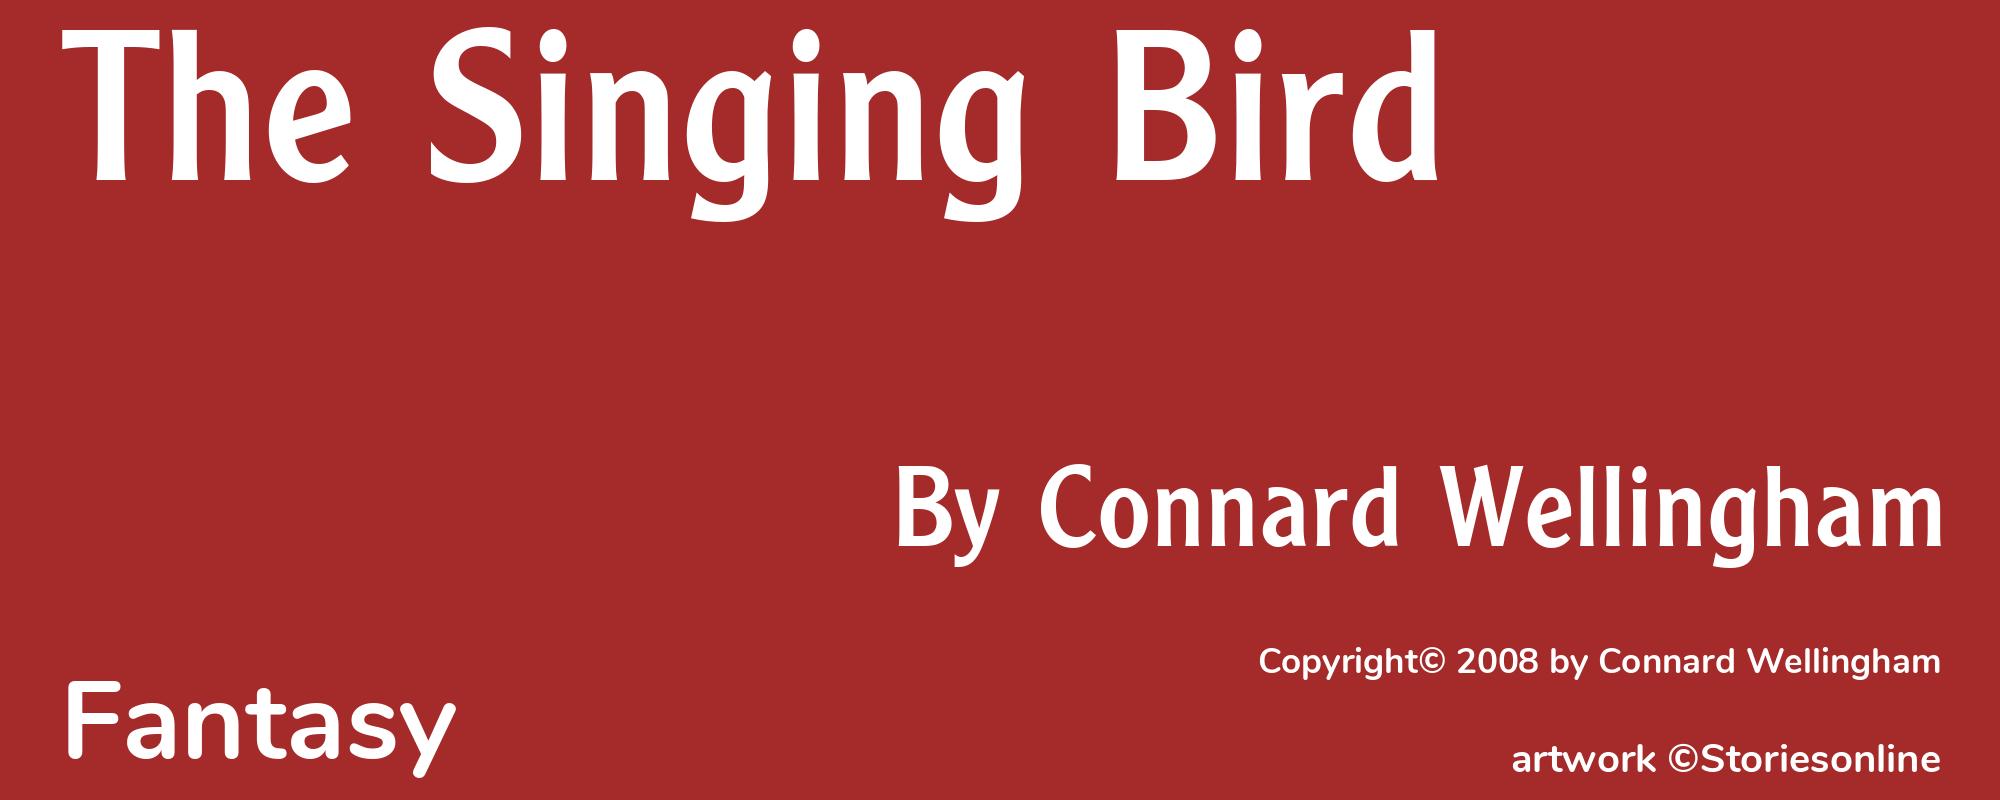 The Singing Bird - Cover